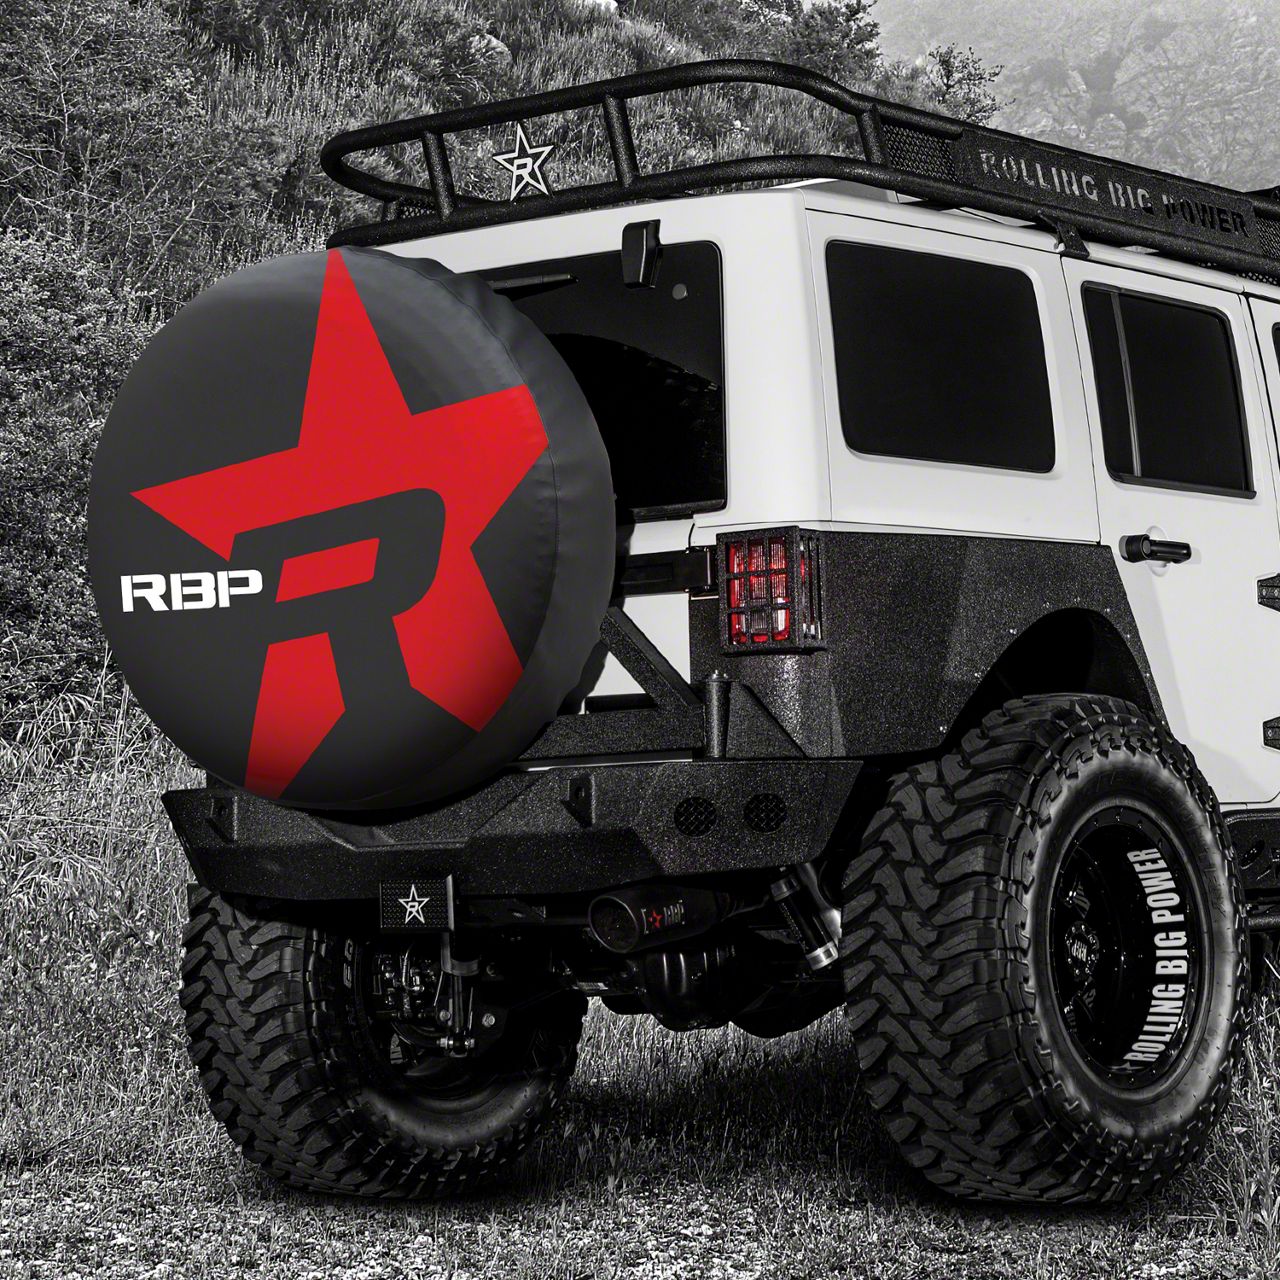 RBP Jeep Wrangler Spare Tire Cover; Red Star; 29.50 to 32.50-Inch Tire Cove  RBP-TC3 (66-18 Jeep CJ5, CJ7, Wrangler YJ, TJ  JK) Free Shipping